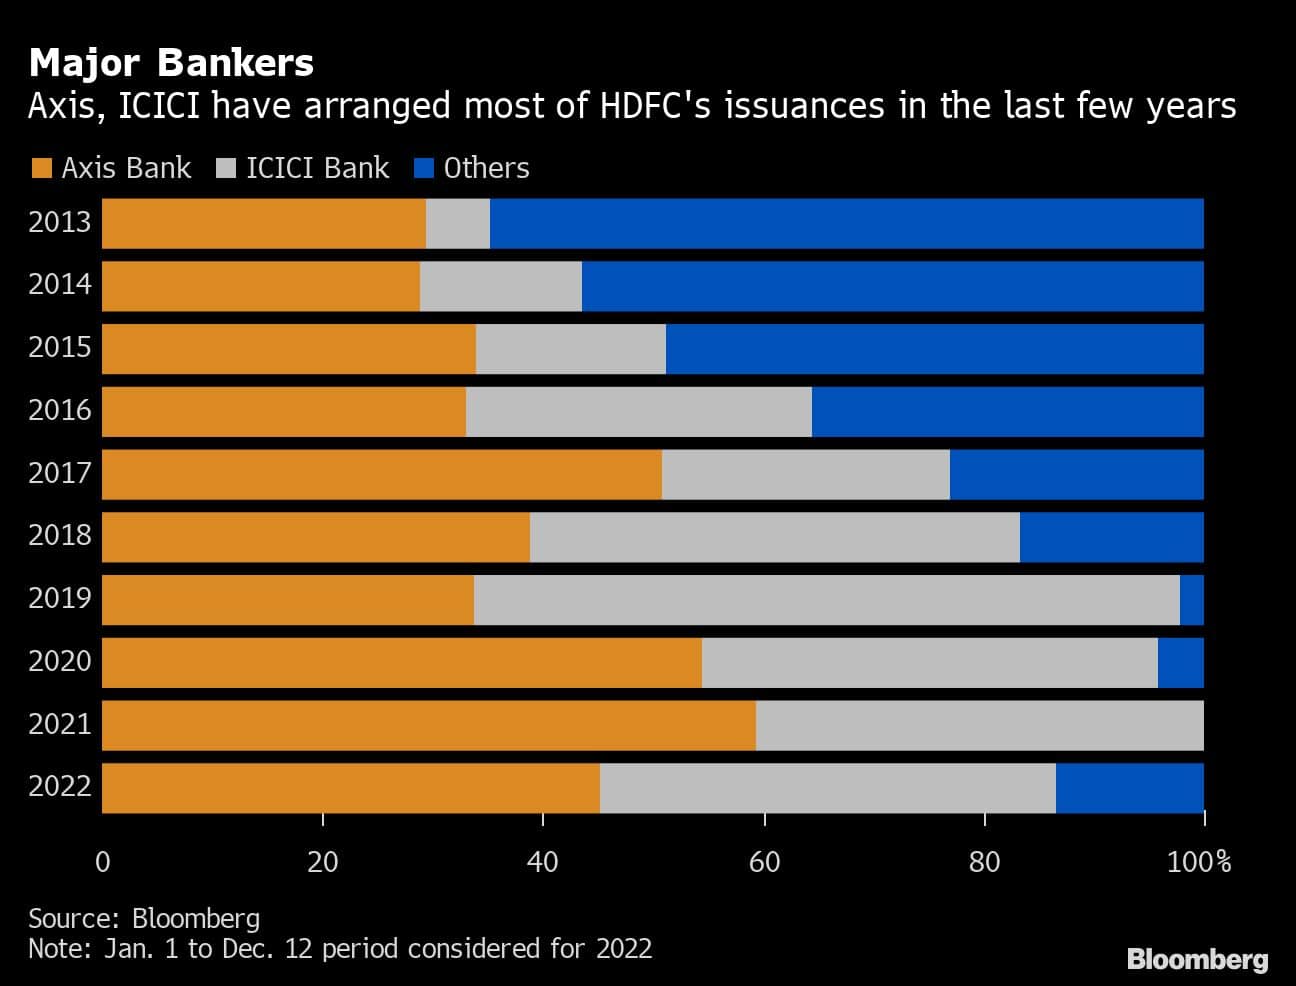 Major Bankers | Axis, ICICI have arranged most of HDFC's issuances in the last few years